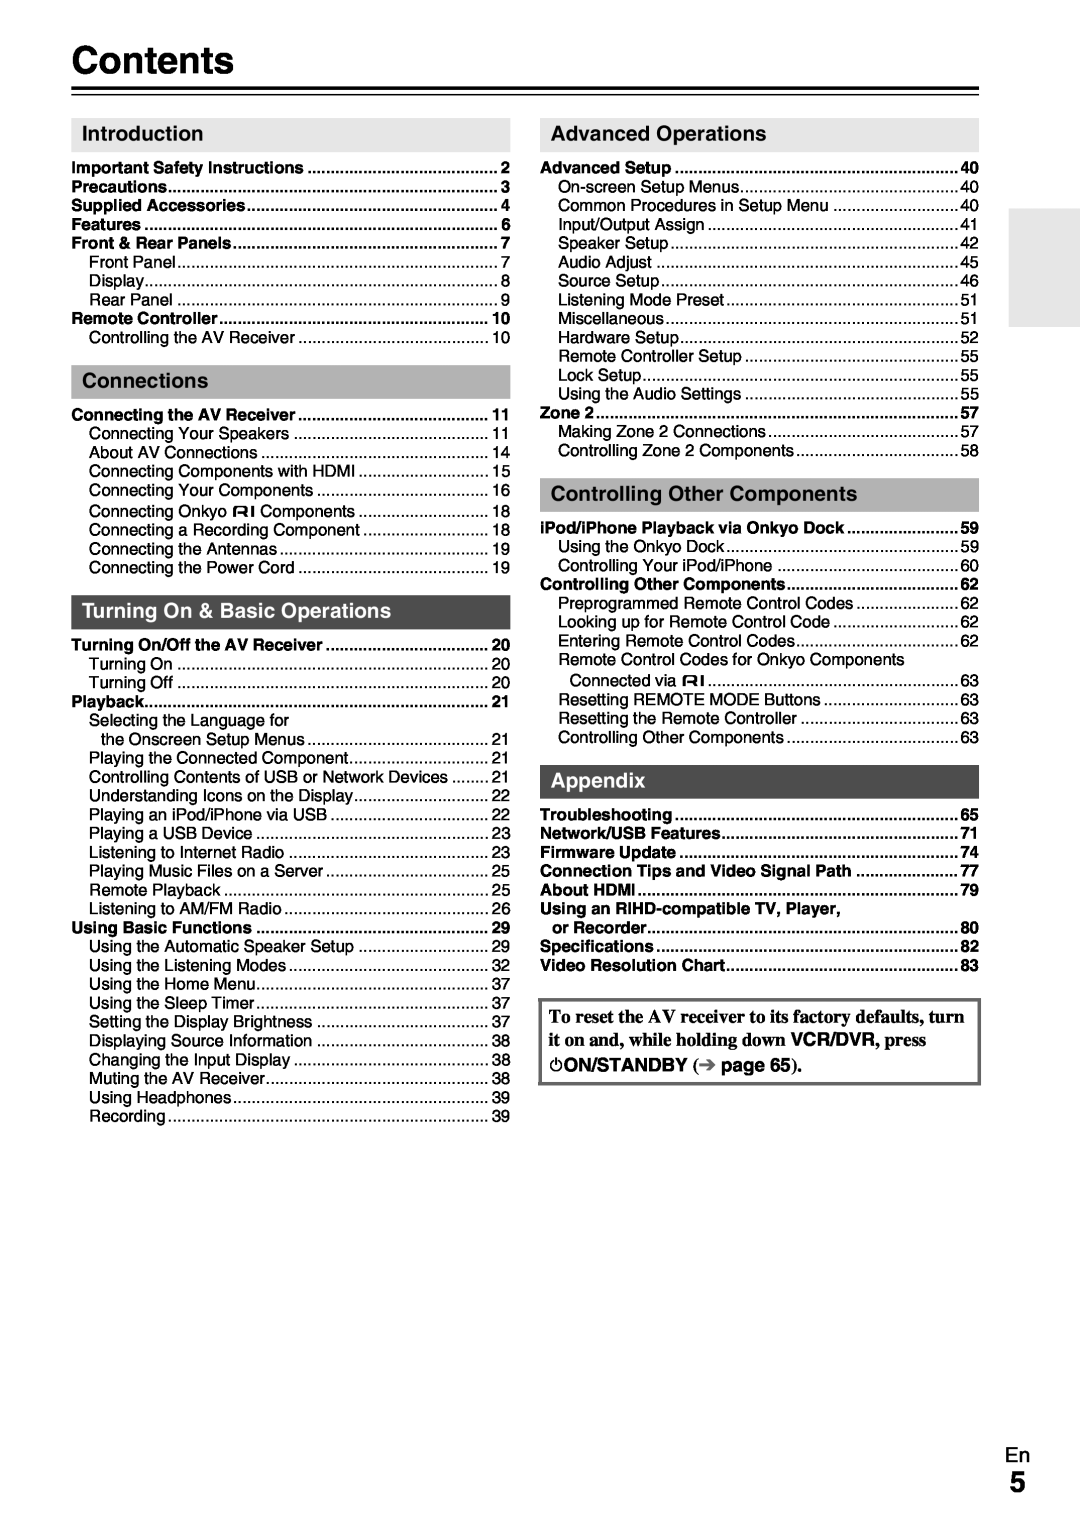 Onkyo TX-NR579 instruction manual Contents, Turning On & Basic Operations, Appendix, 8ON/STANDBY page 